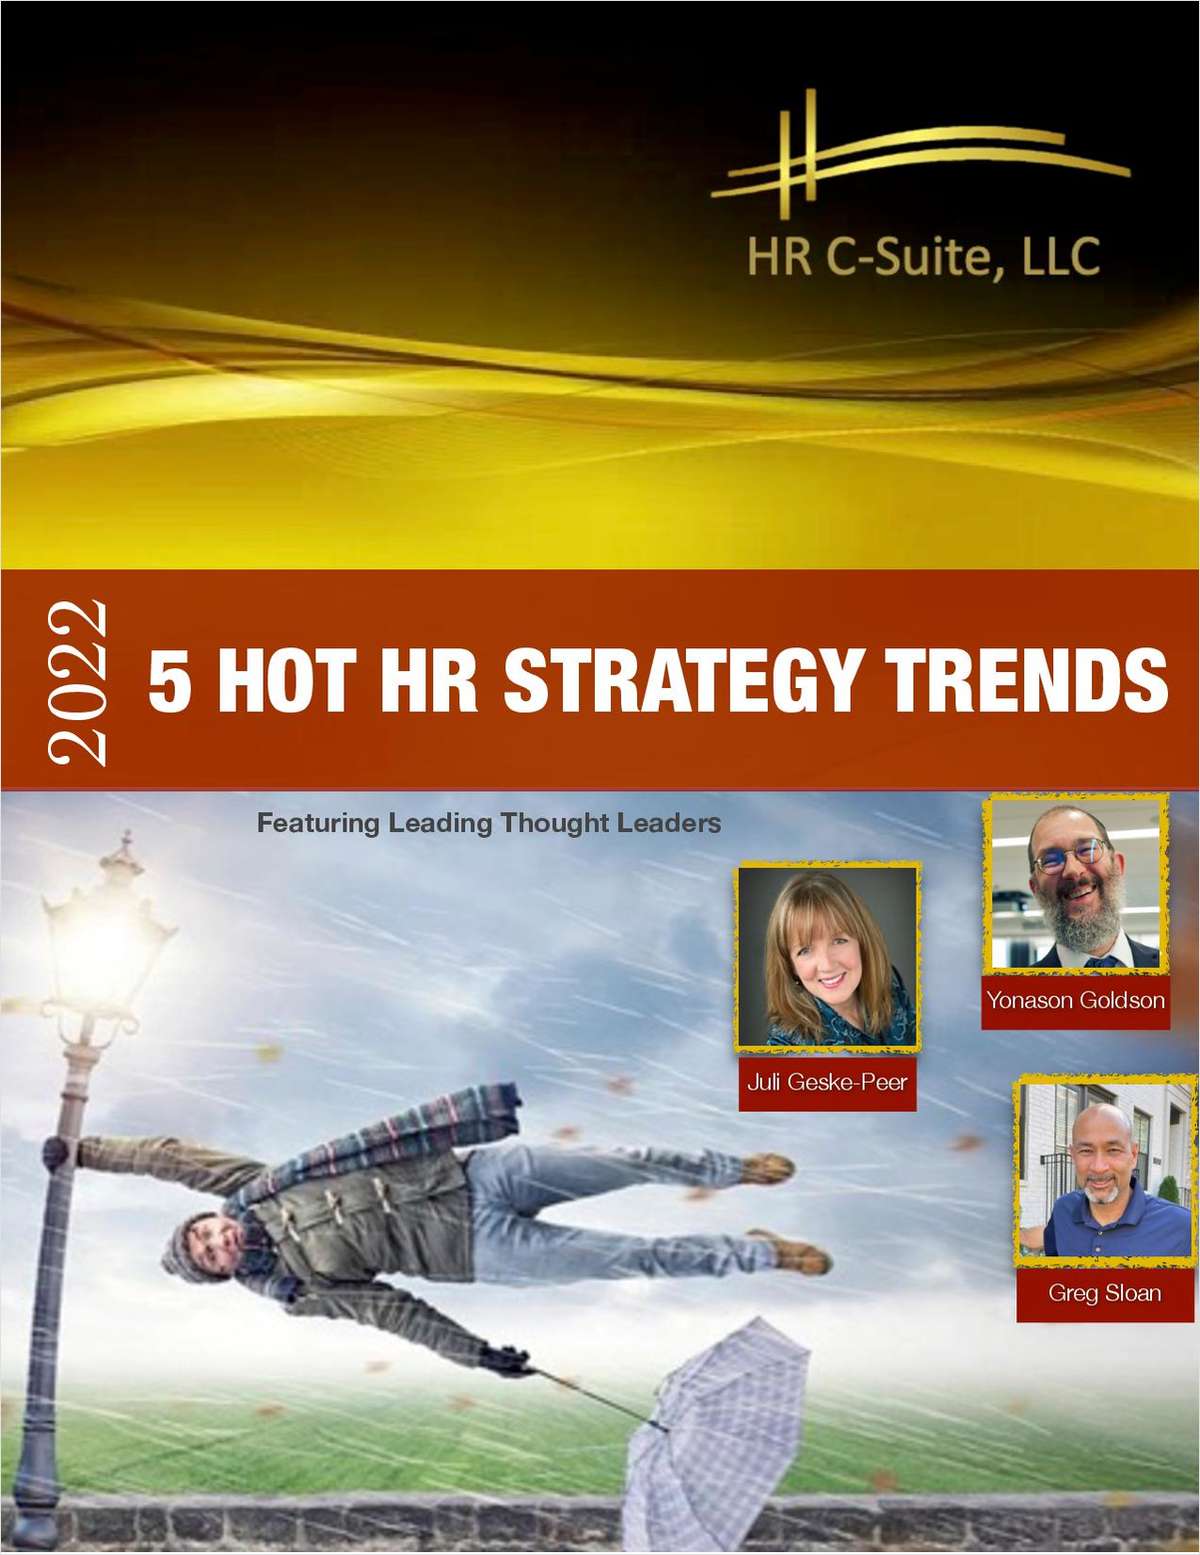 5 Hot HR Strategy Trends for 2022